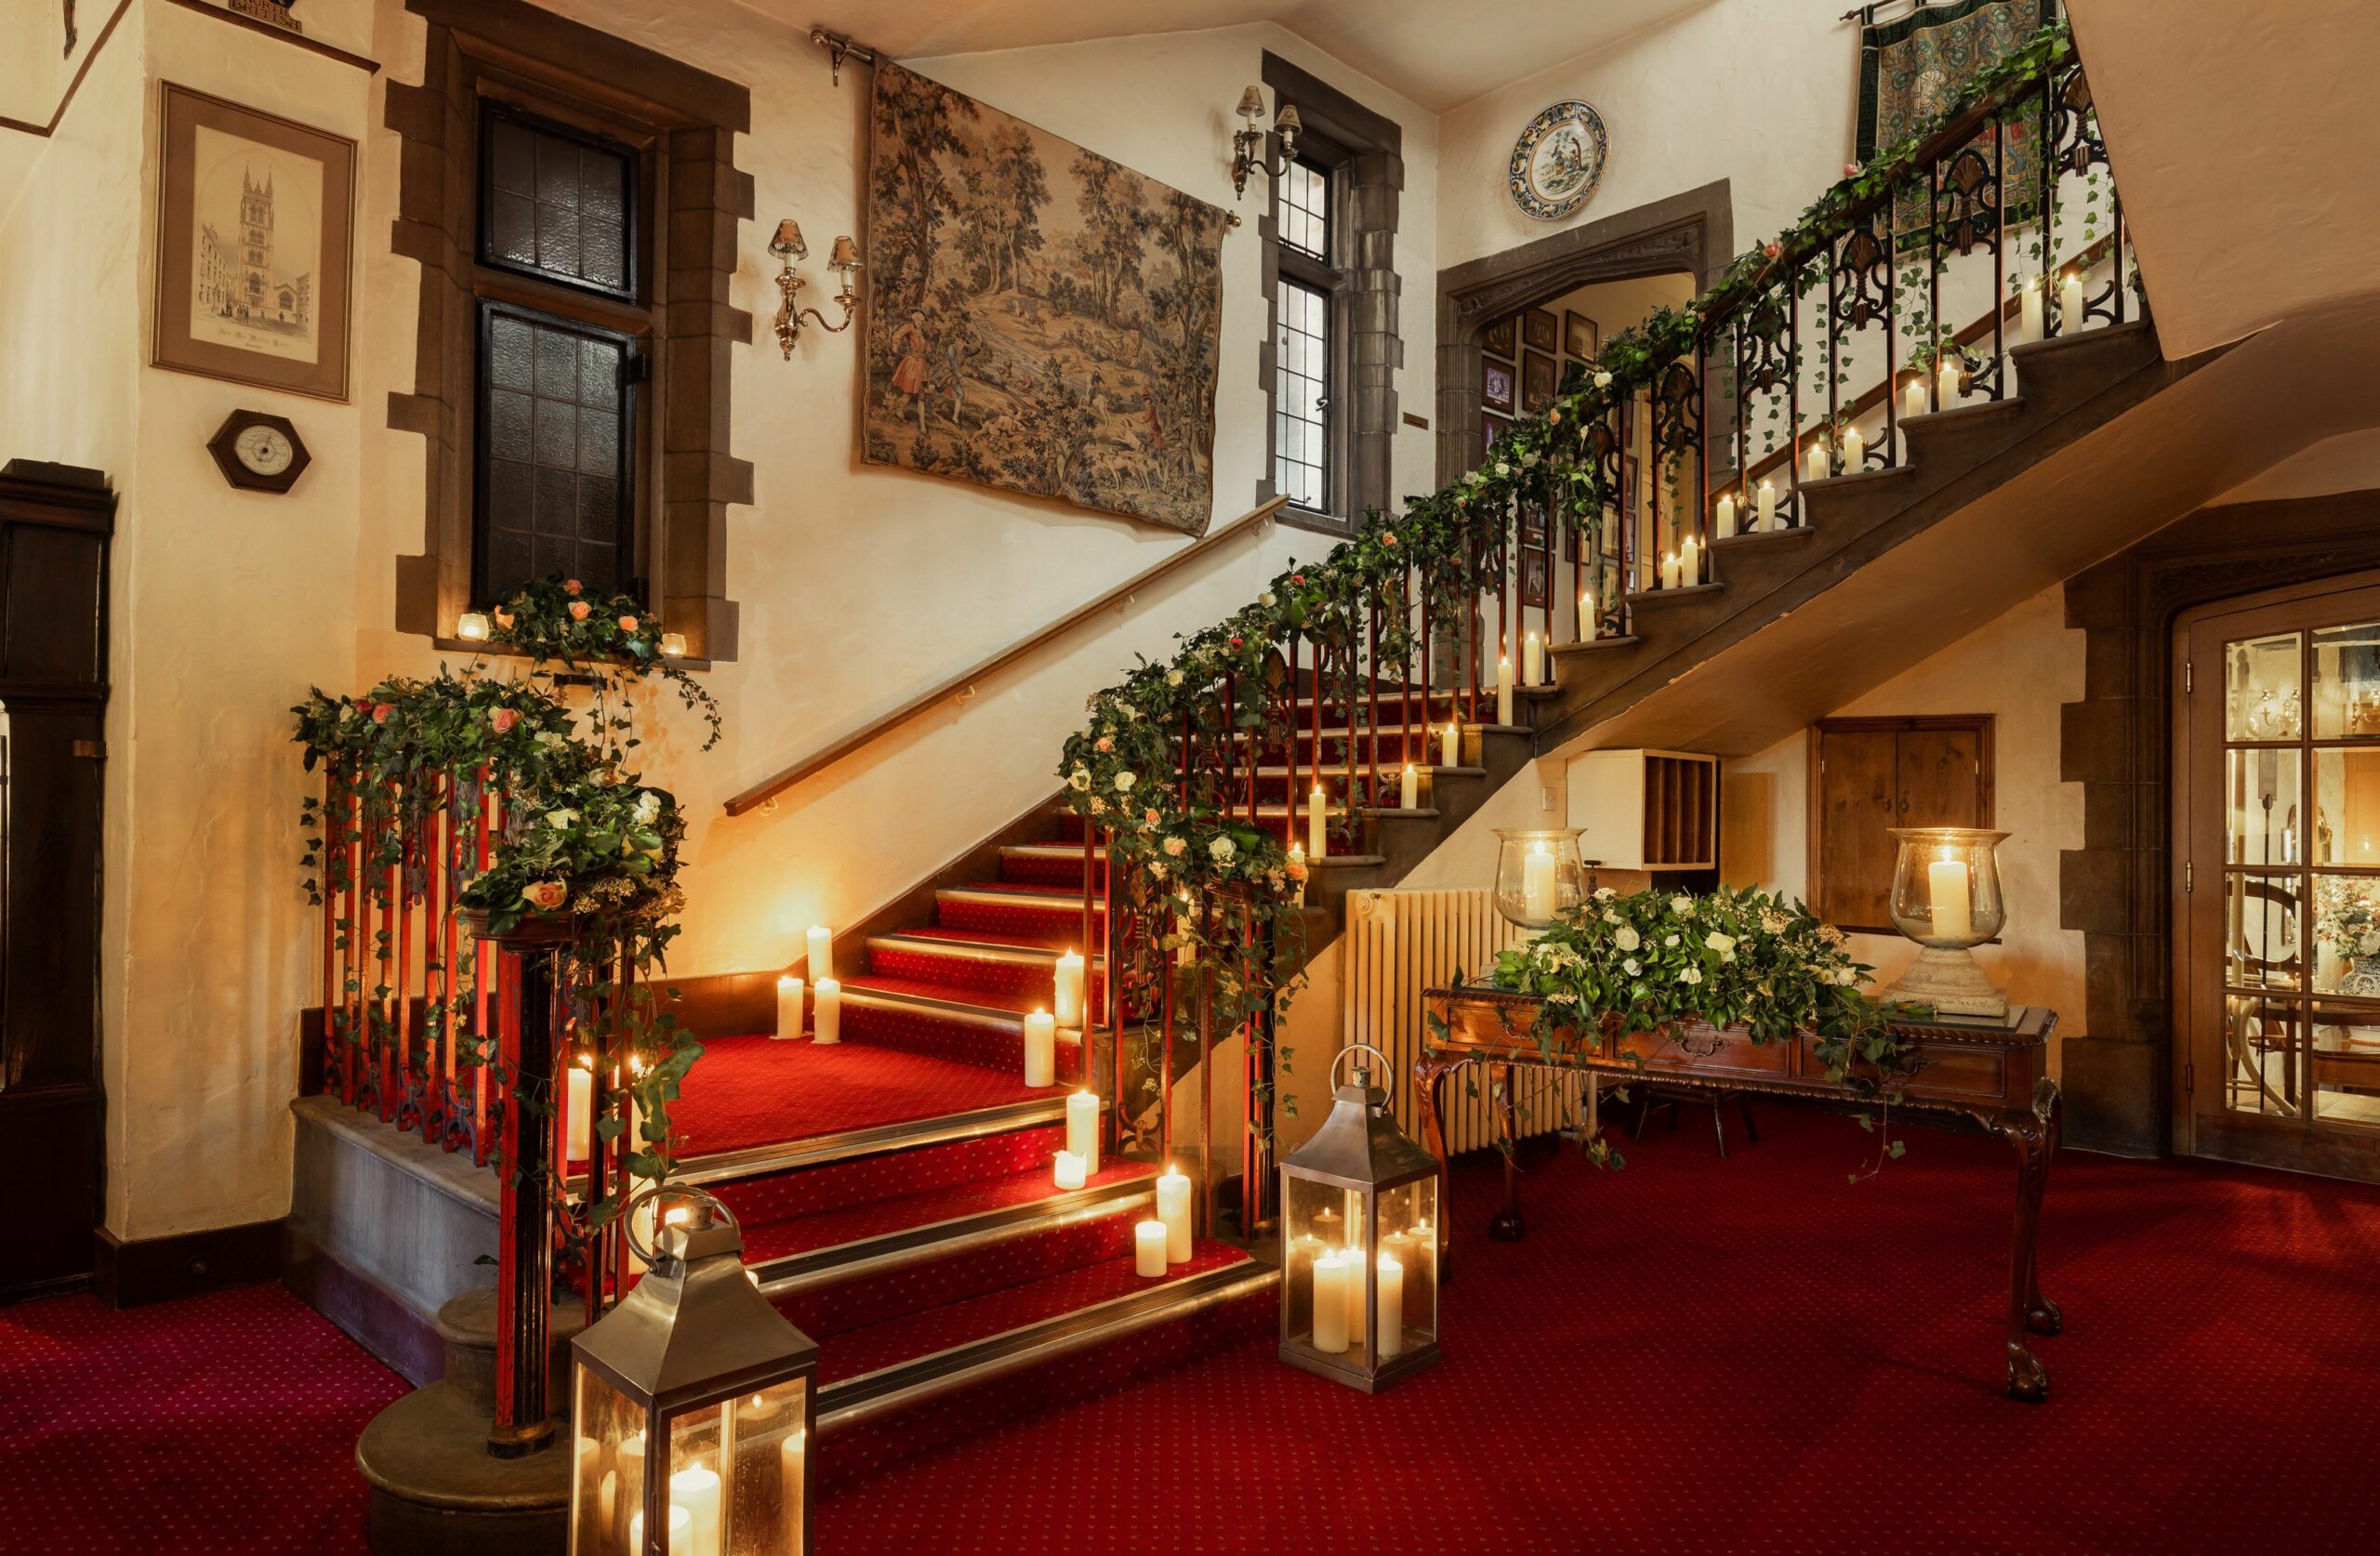 Stairway at The Castle at Taunton decorated for Christmas.